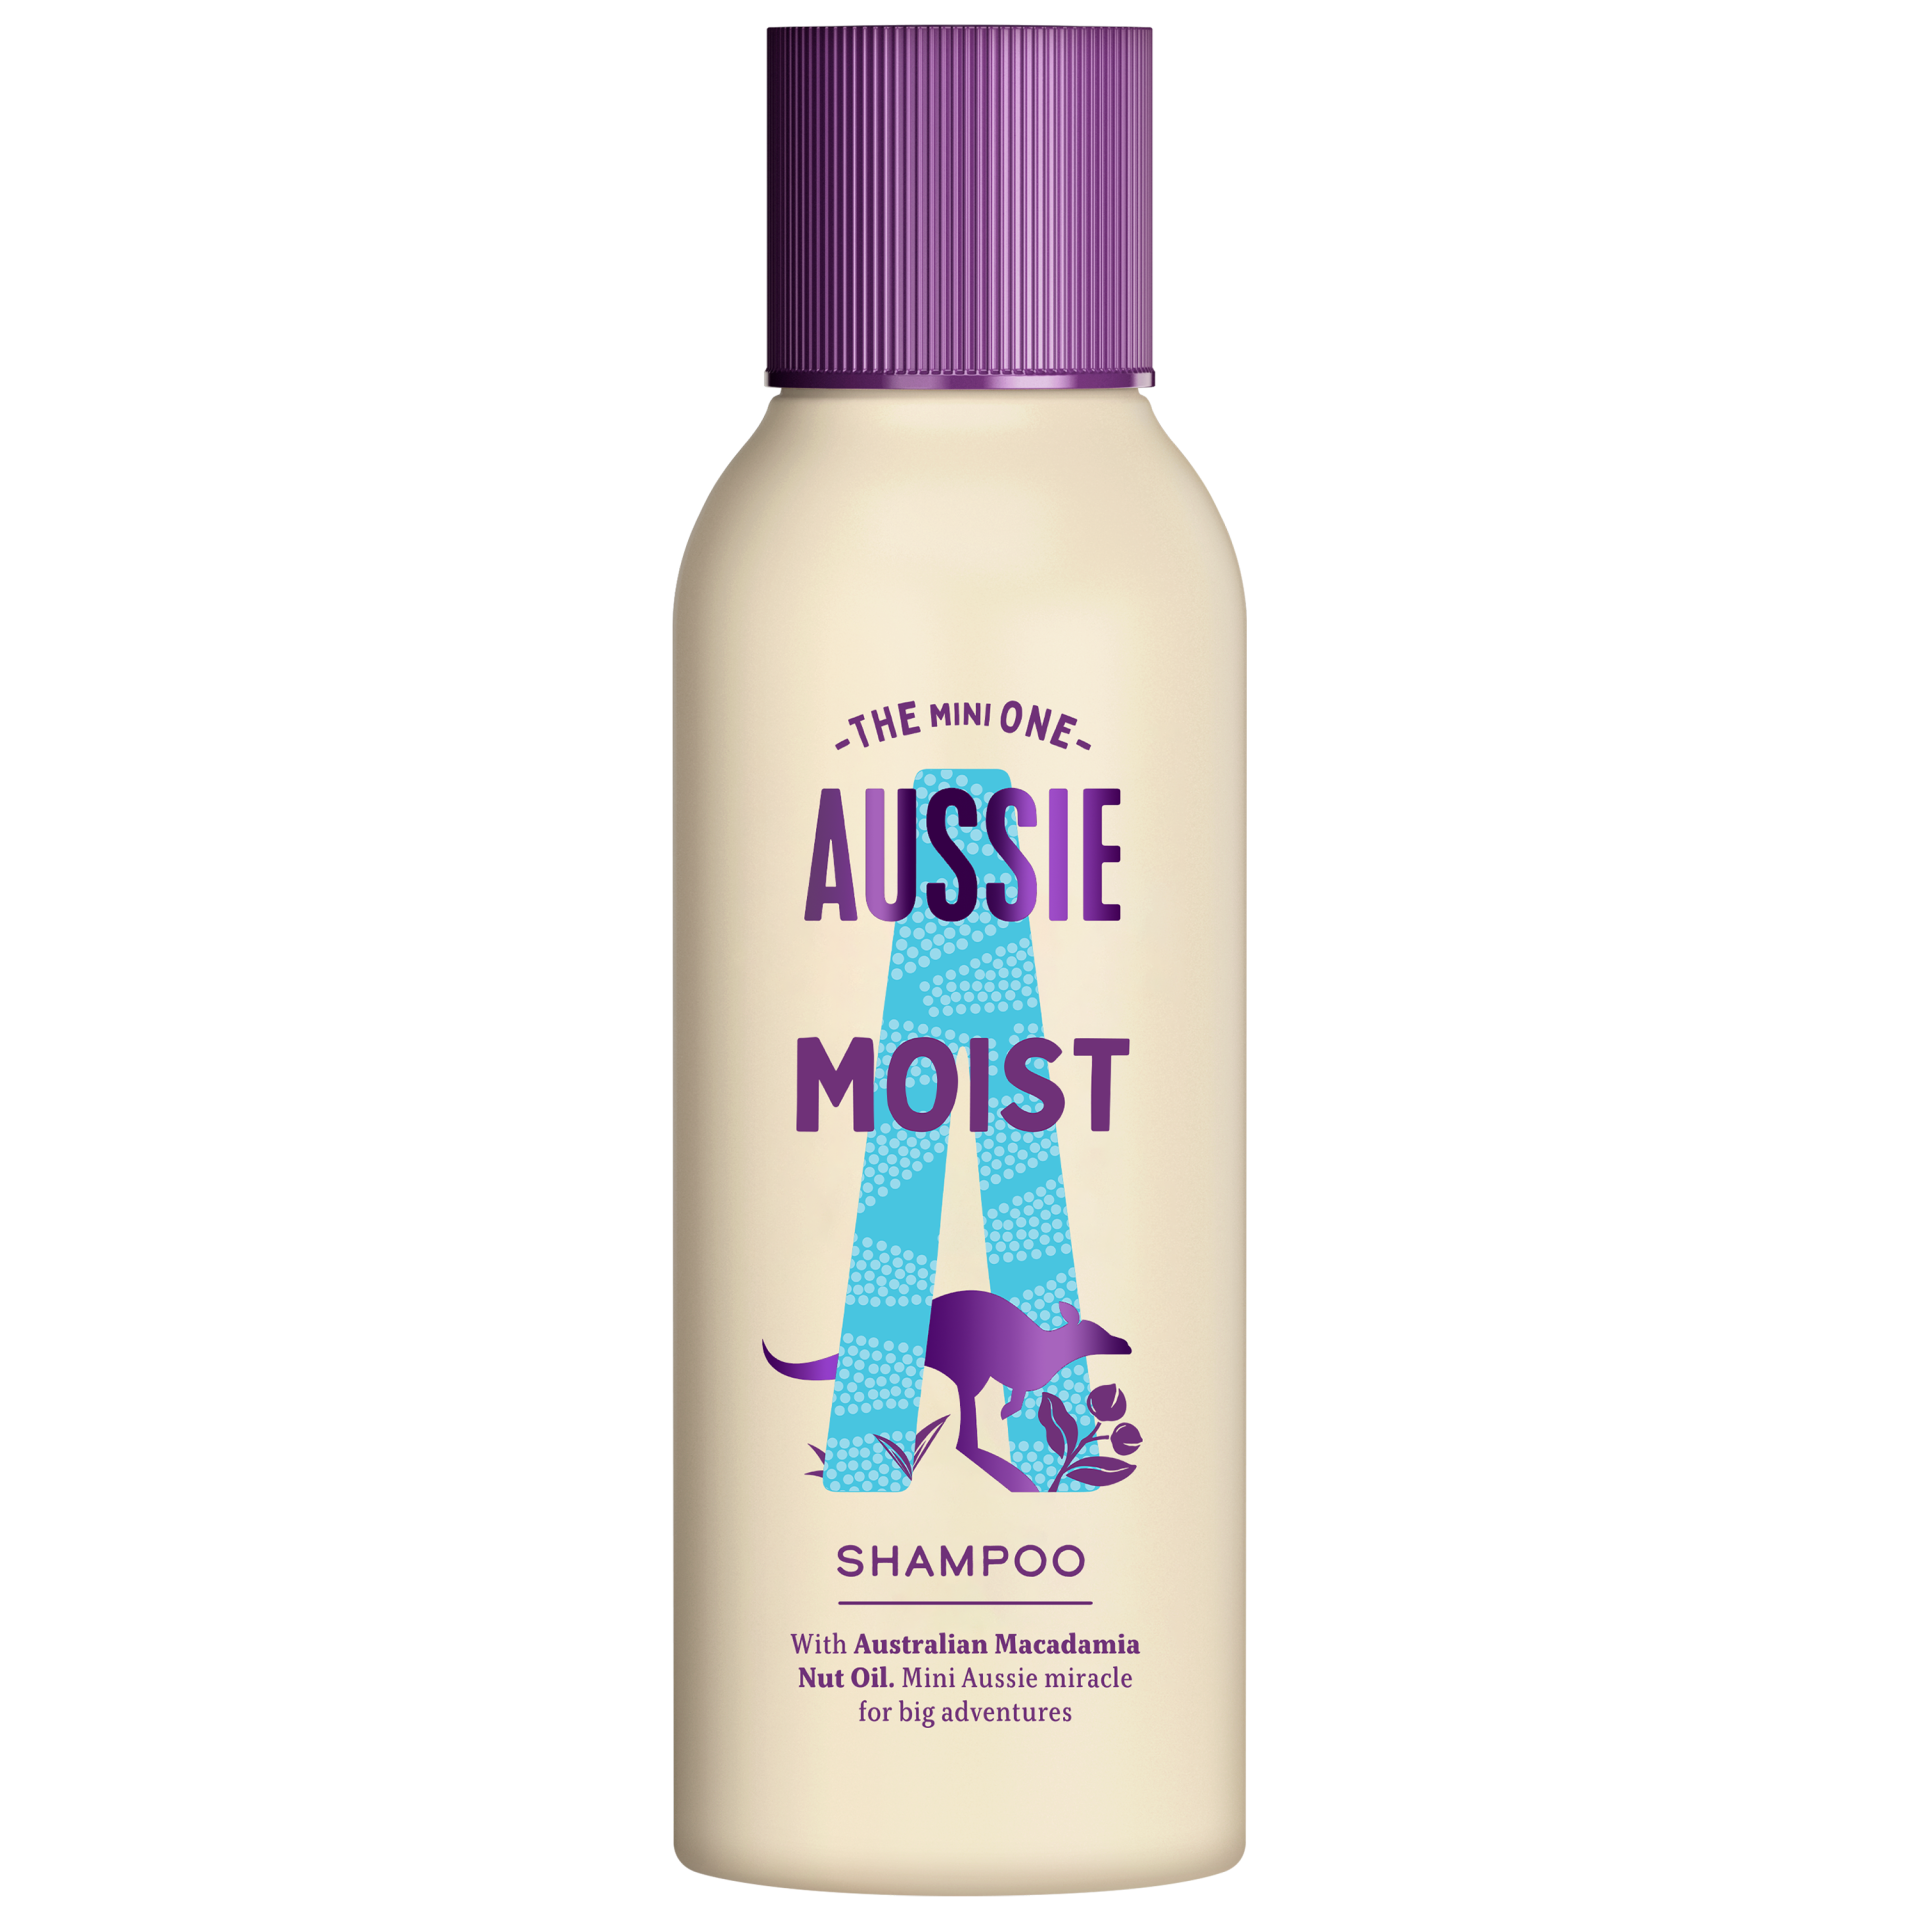 Shampoo For Dry & Damaged Hair, Miracle Moist